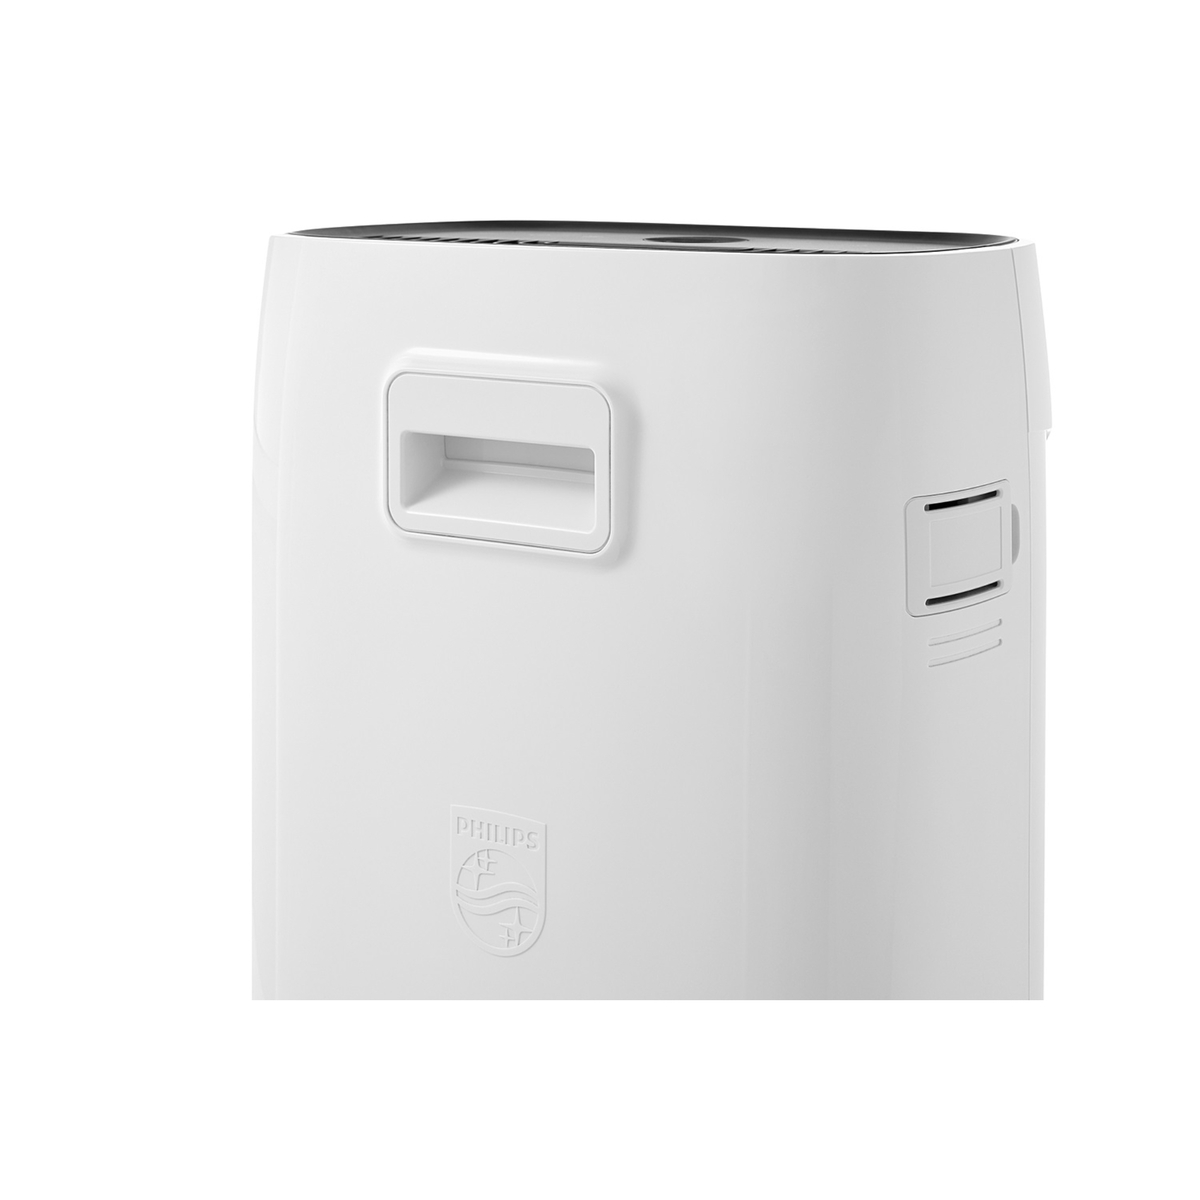 Philips Air Purifier with Smart Filter Indicator, 79 m², White, AC2889/90